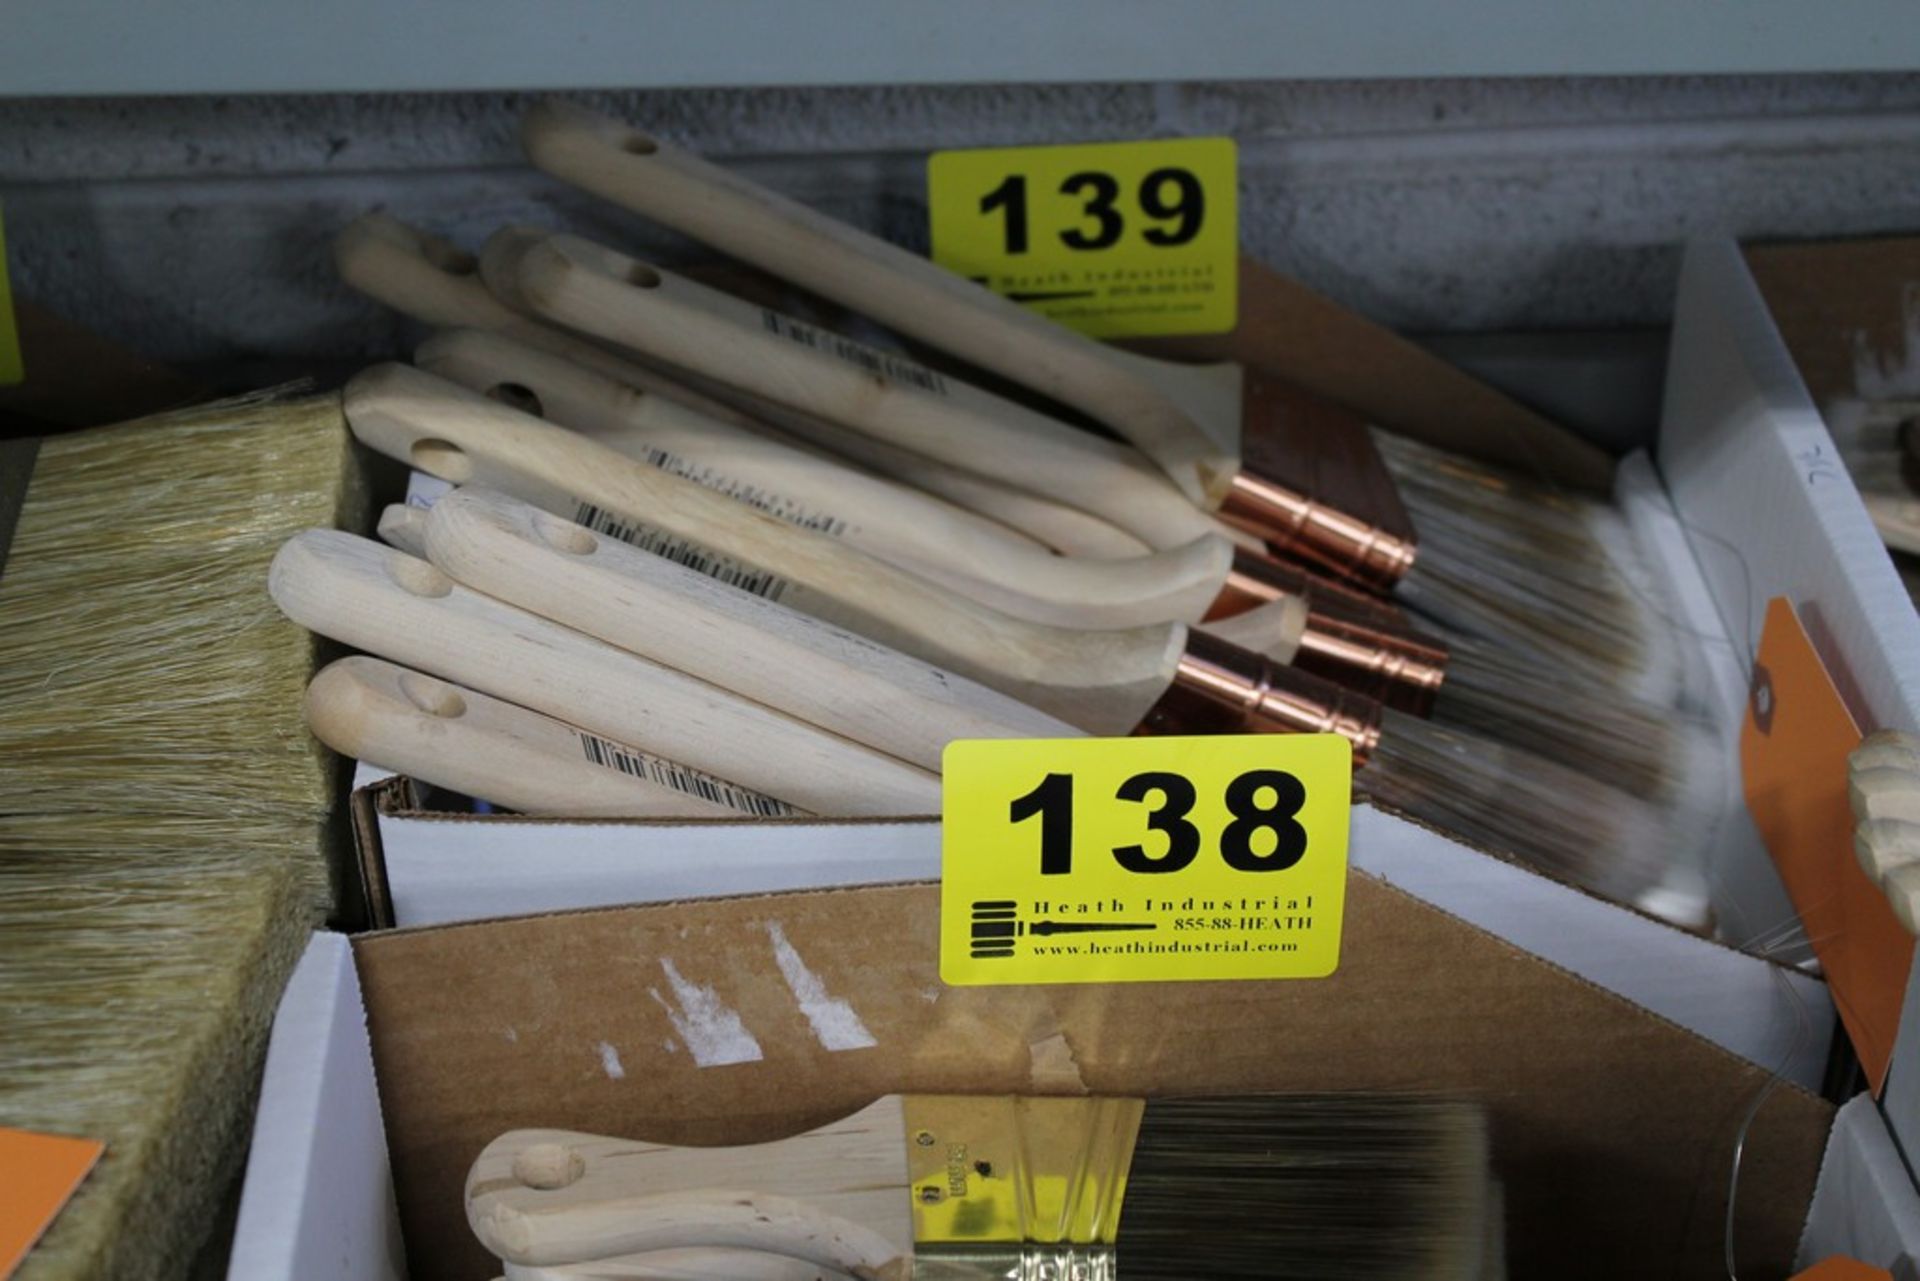 (11) 2 1/2" WOOSTER PAINTBRUSHES